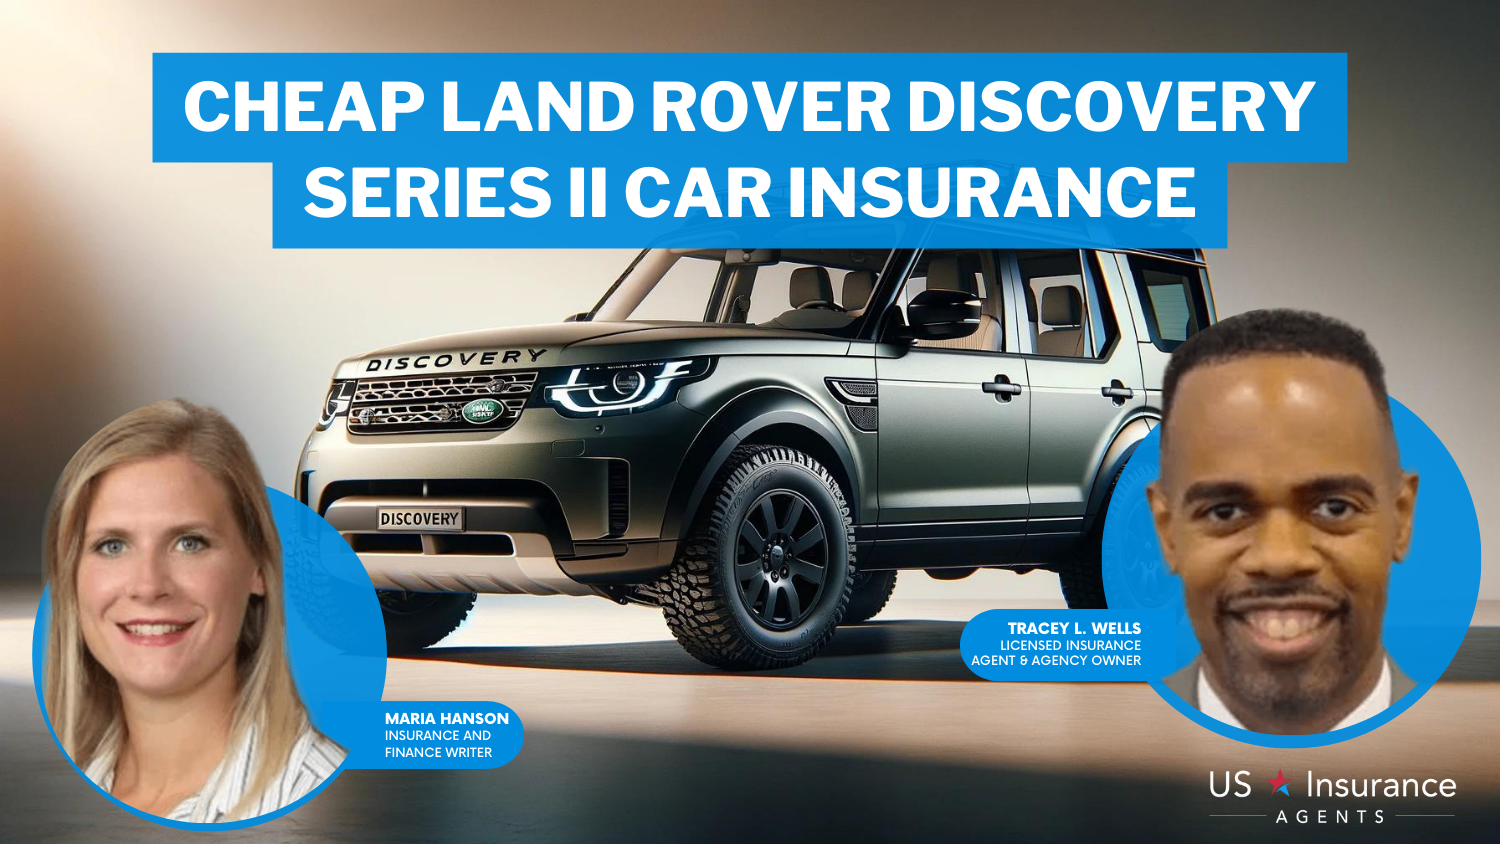 Safeco, USAA and State Farm: Cheap Land Rover Discovery Series II Car Insurance